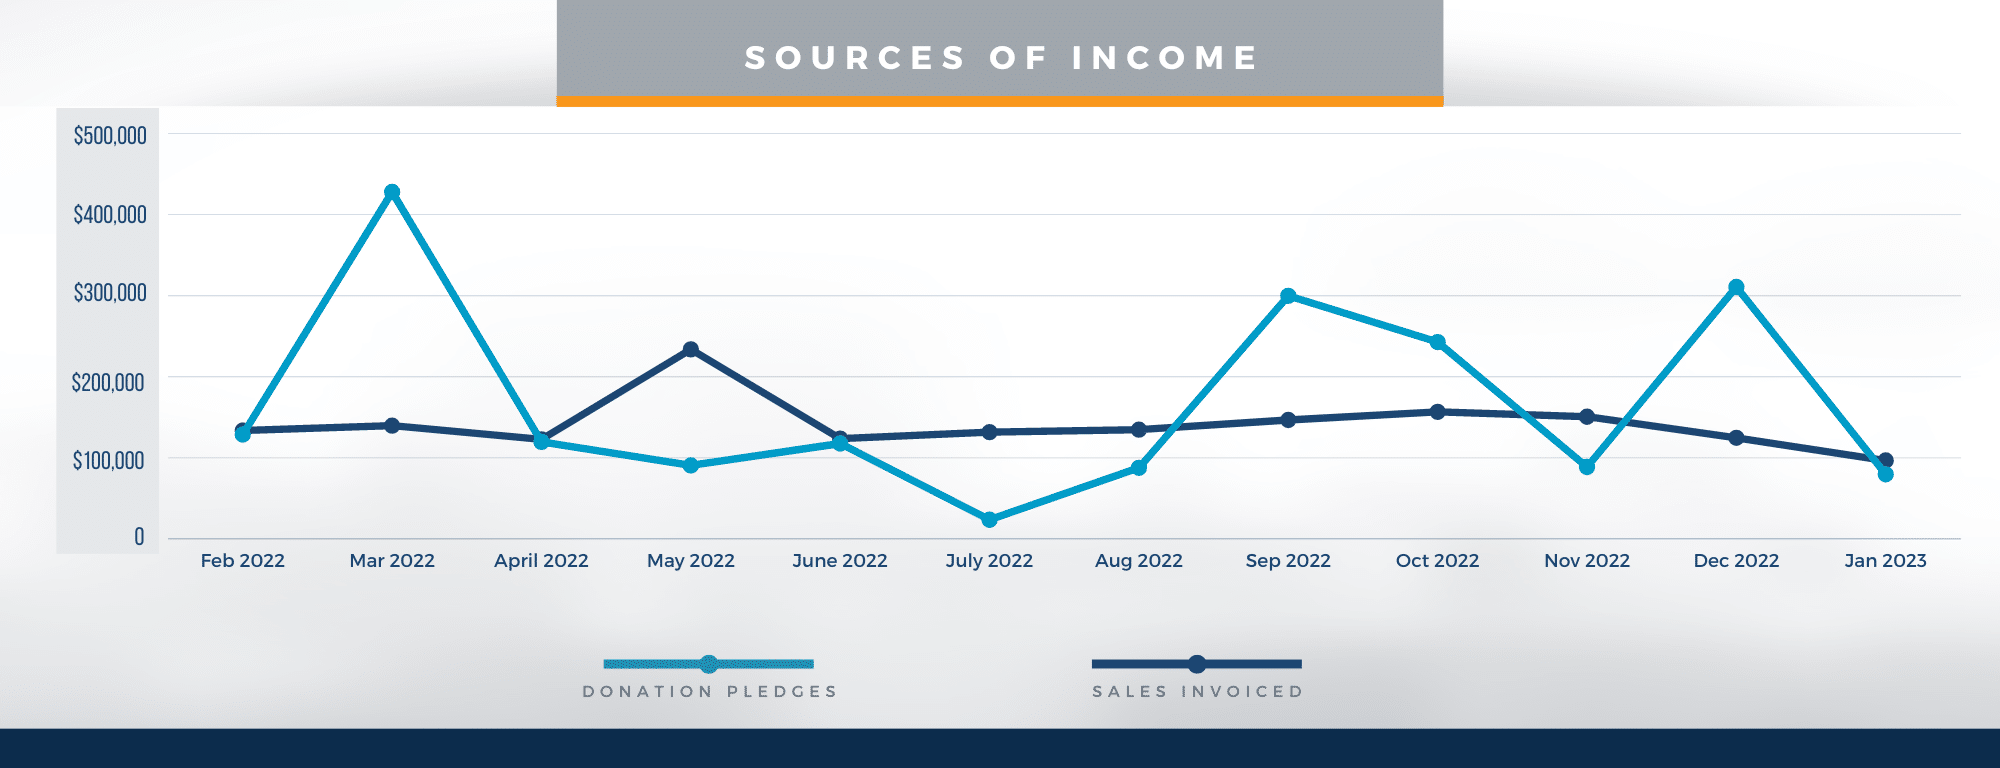 Sources of Income - February